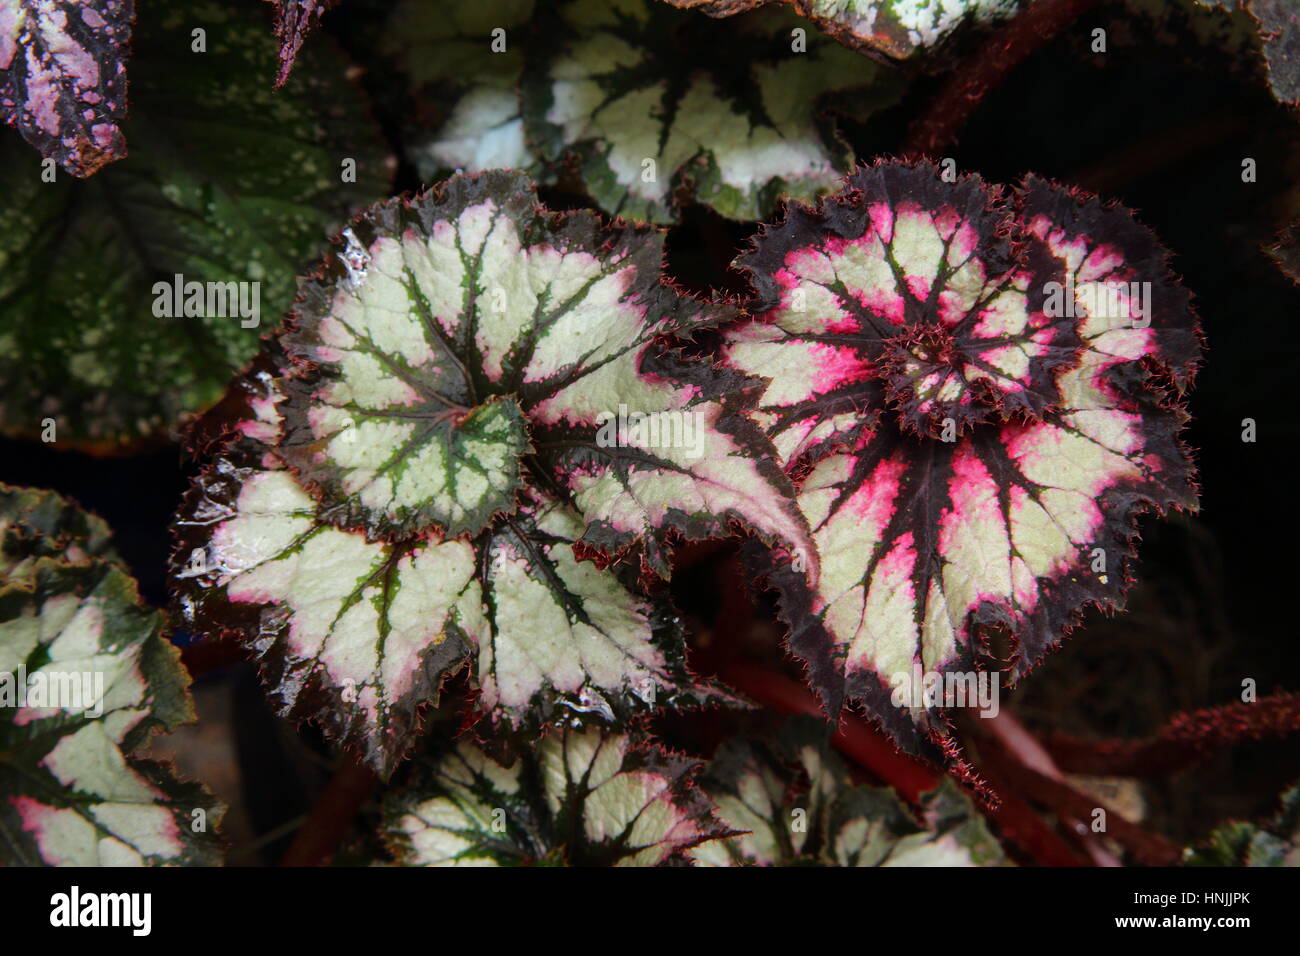 Colorfully patterned begonia begonia leaves. Stock Photo